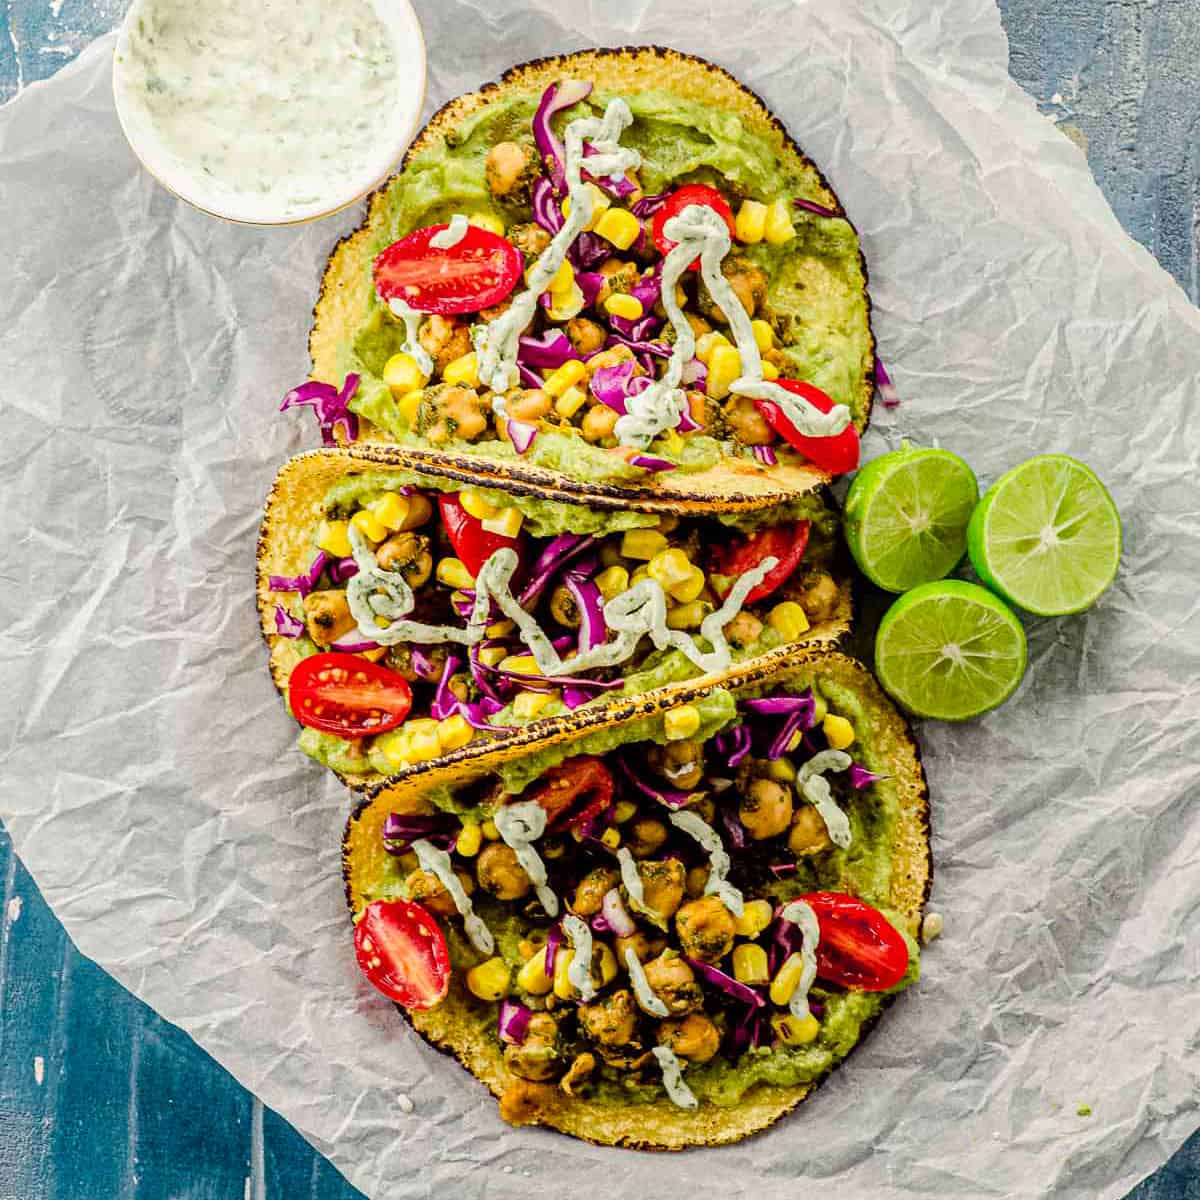 Vegan Chickpea Tacos - May I Have That Recipe?